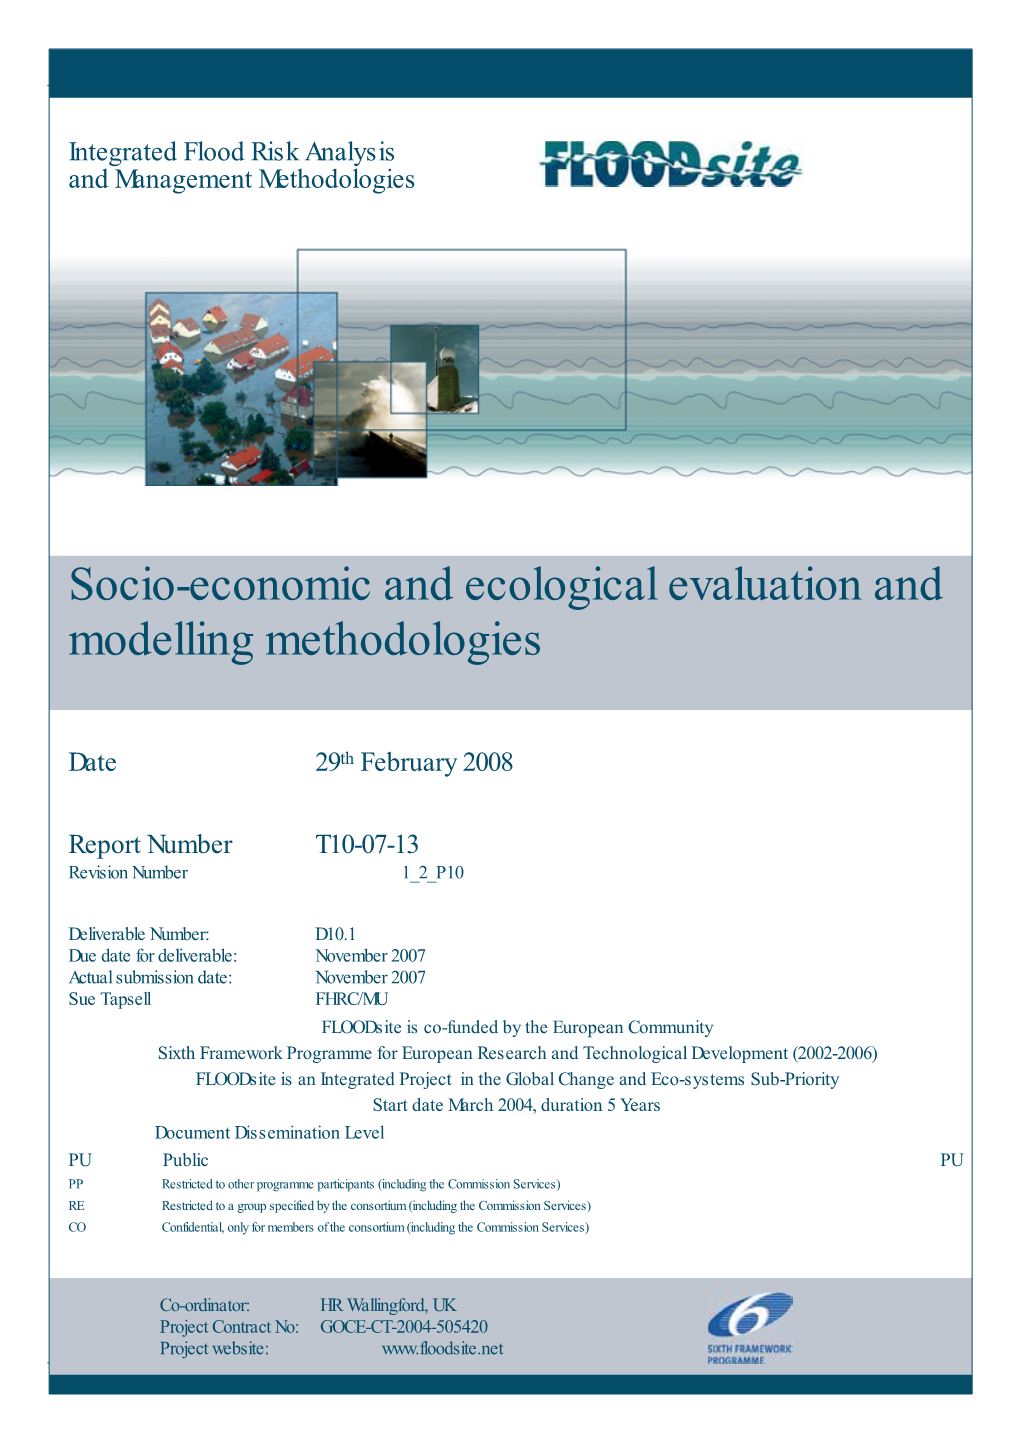 Socio-Economic and Ecological Evaluation and Modelling Methodologies